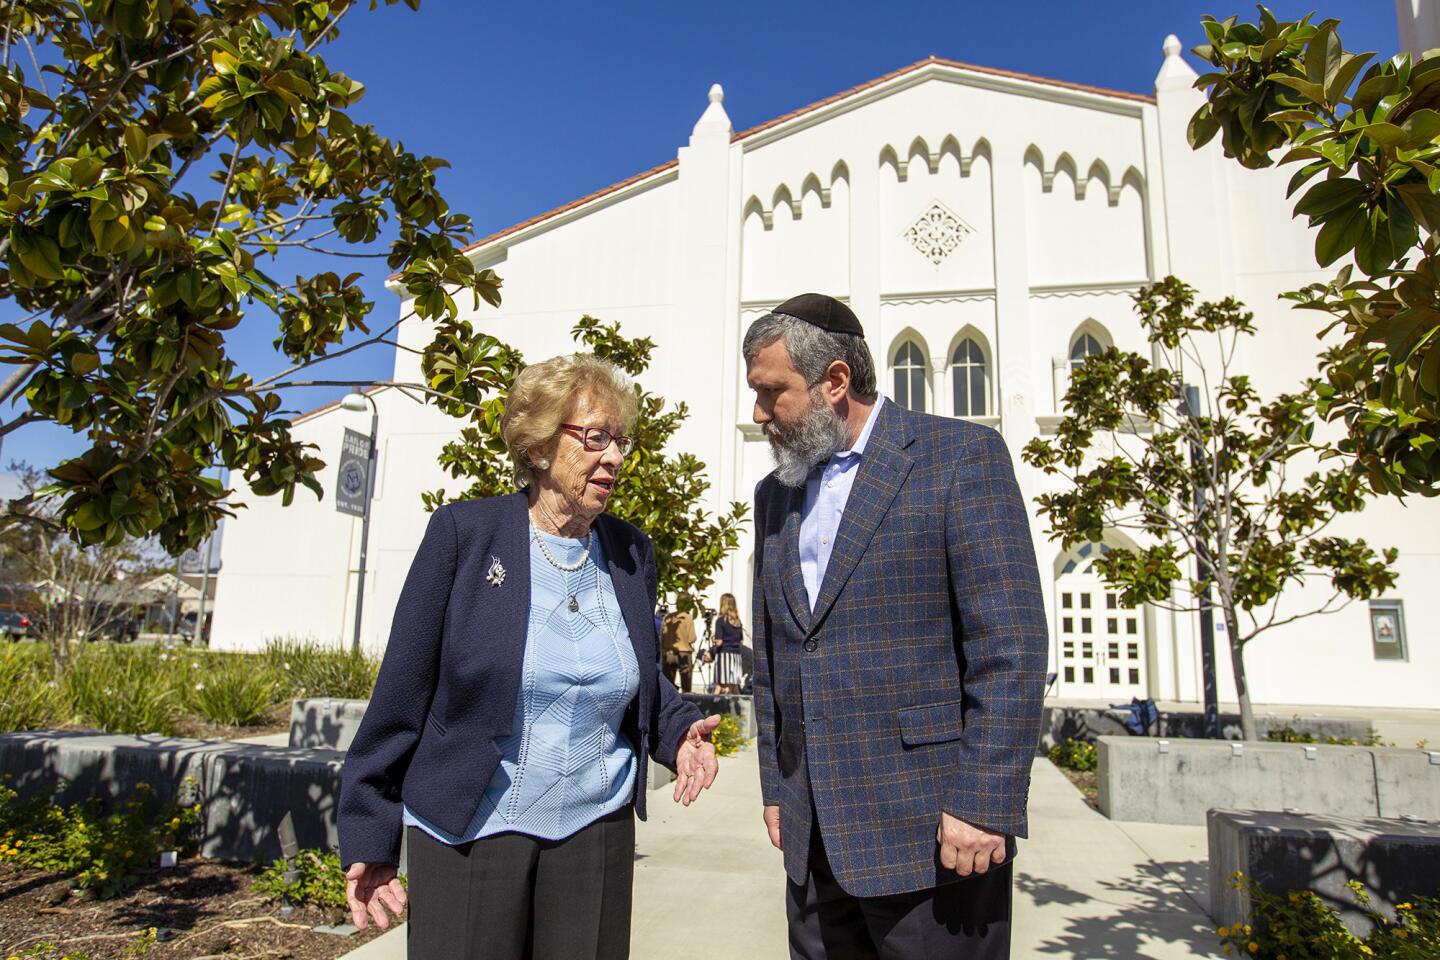 Eva Schloss, 89, a Holocaust survivor and Anne Frank's stepsister, speaks with Chabab Rabbi Reuven Mintz during a press conference at Newport Harbor High school on Thursday, March 7. Schloss met and talked with students invoived in a party made Nazi salutes around a Swastika that made of red cups during an off-campus party last week.